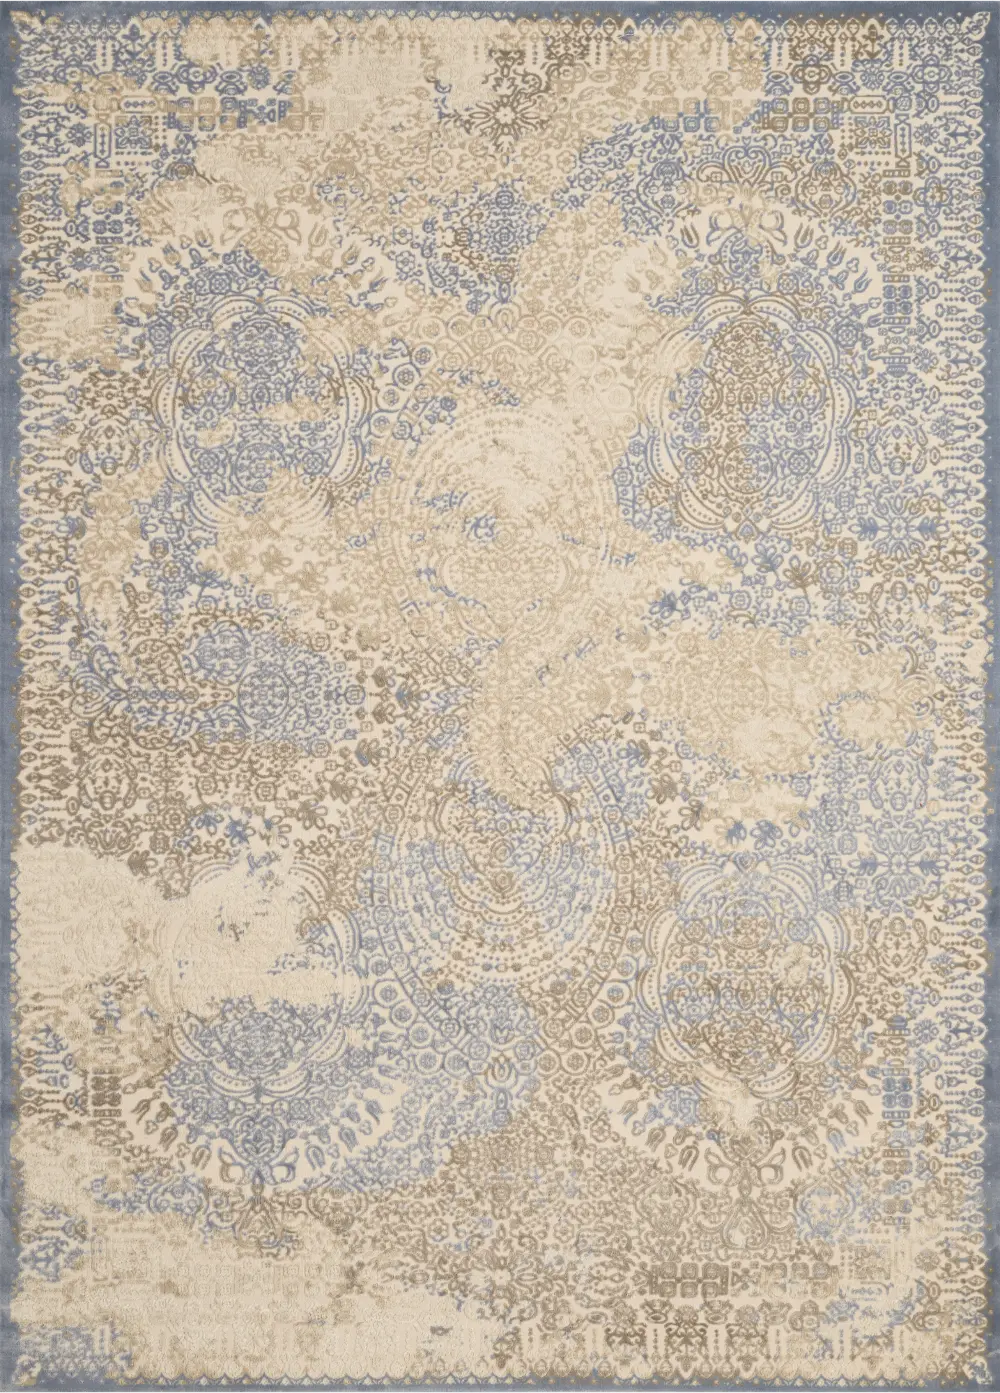 8 x 11 Large Neutral Beige and Soft Blue Rug - Dais-1